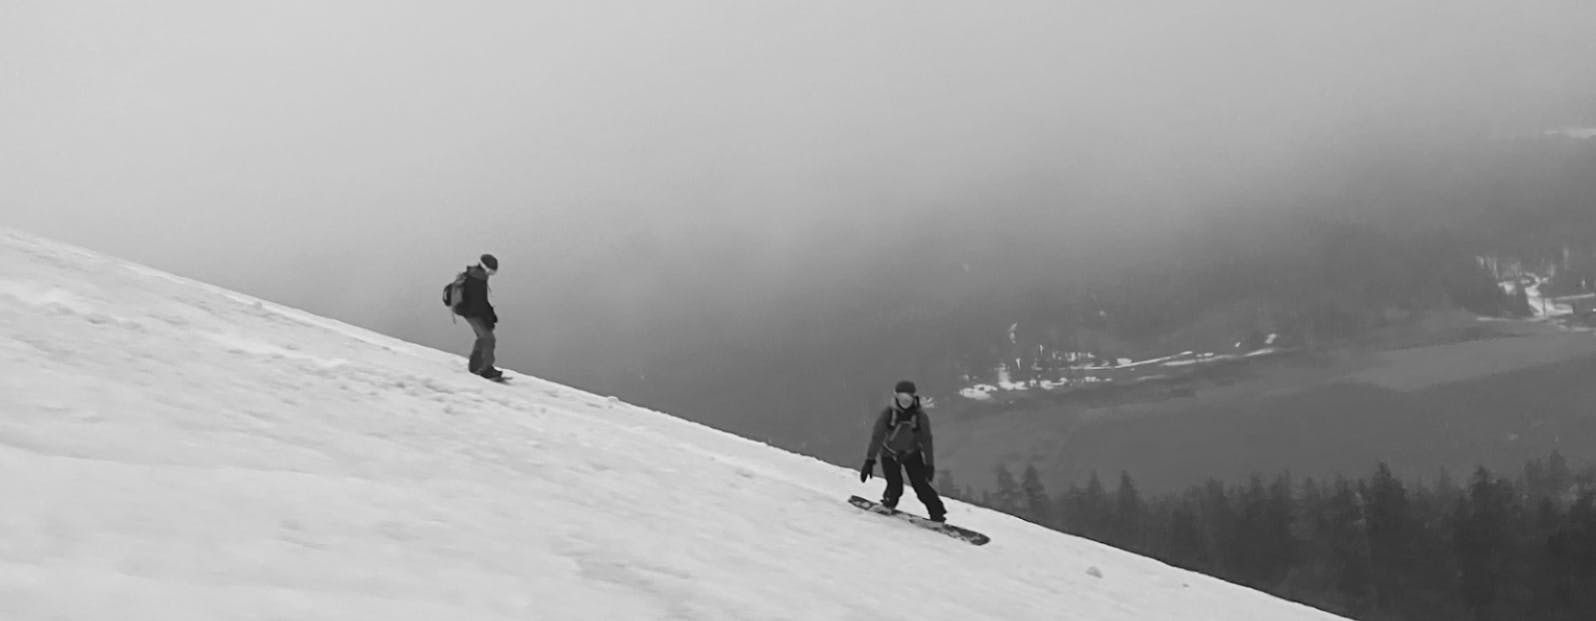 Two snowboarders on a snowy mountain.